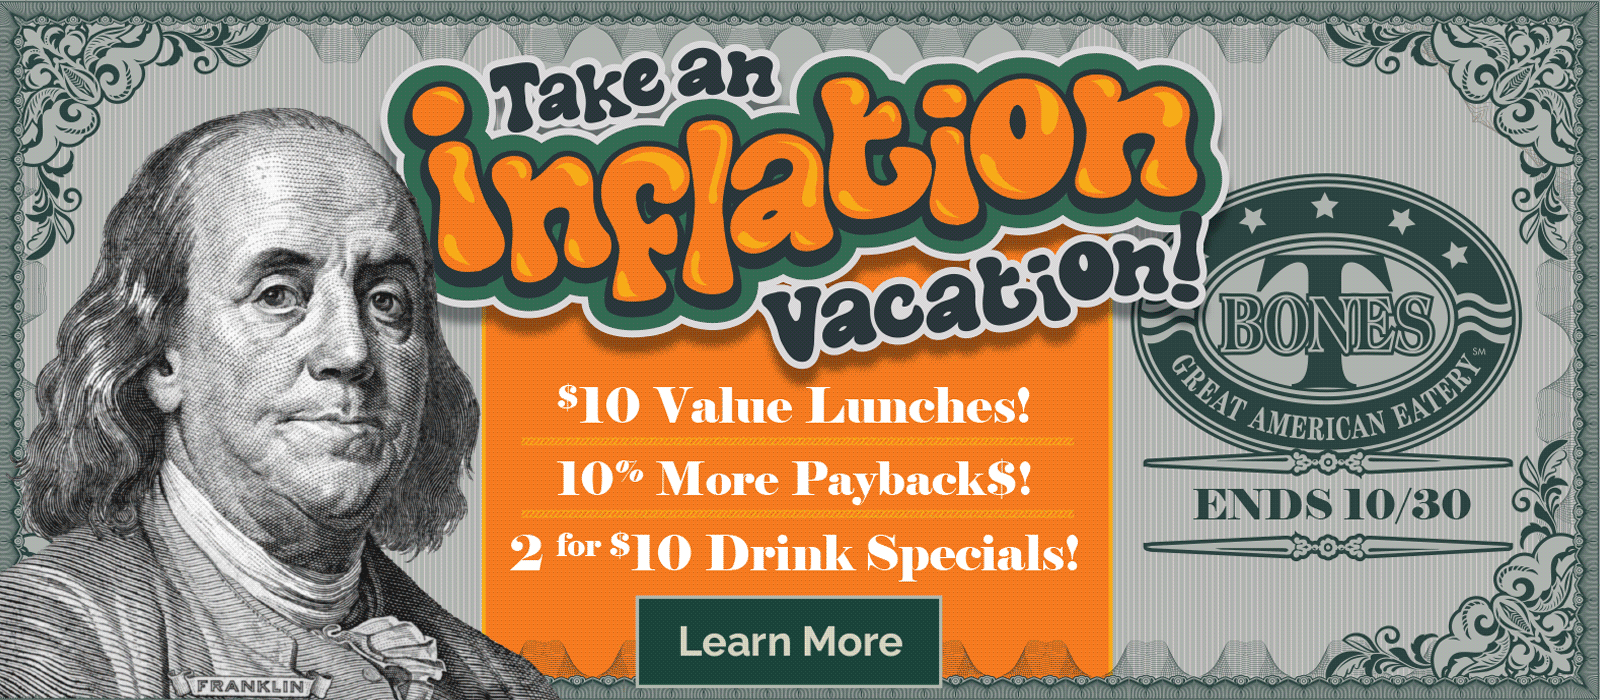 Inflation Vacation